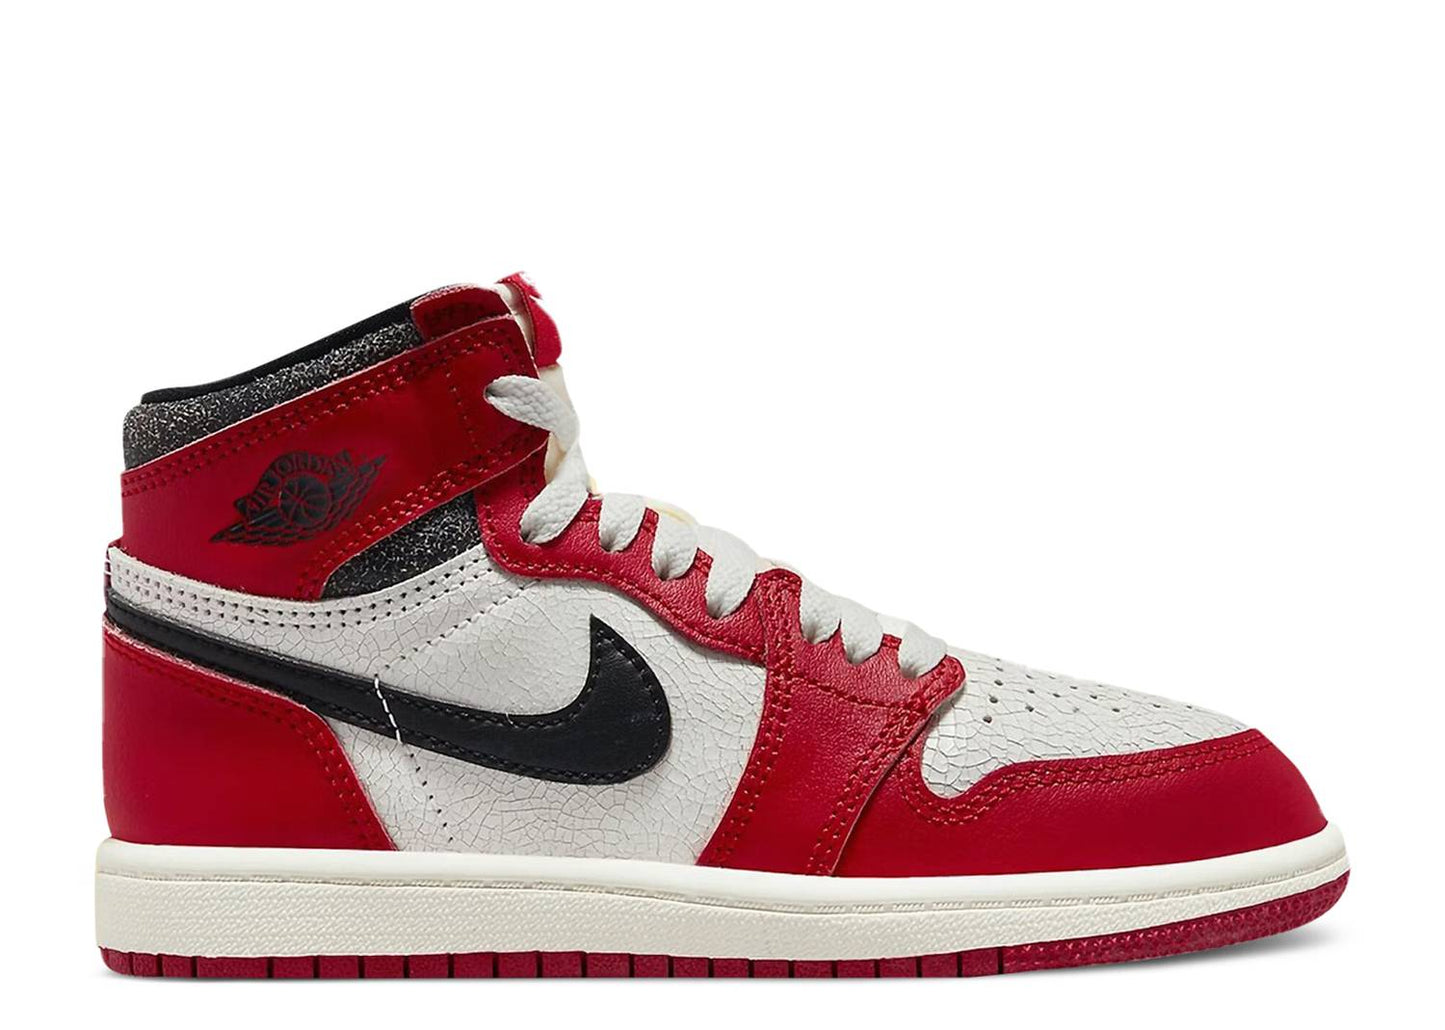 Nike Air Jordan 1 Retro High PS Chicago Lost and Found FD1412 612 -Nike Air Jordan 1 Retro High PS Chicago Lost and Found FD1412 612